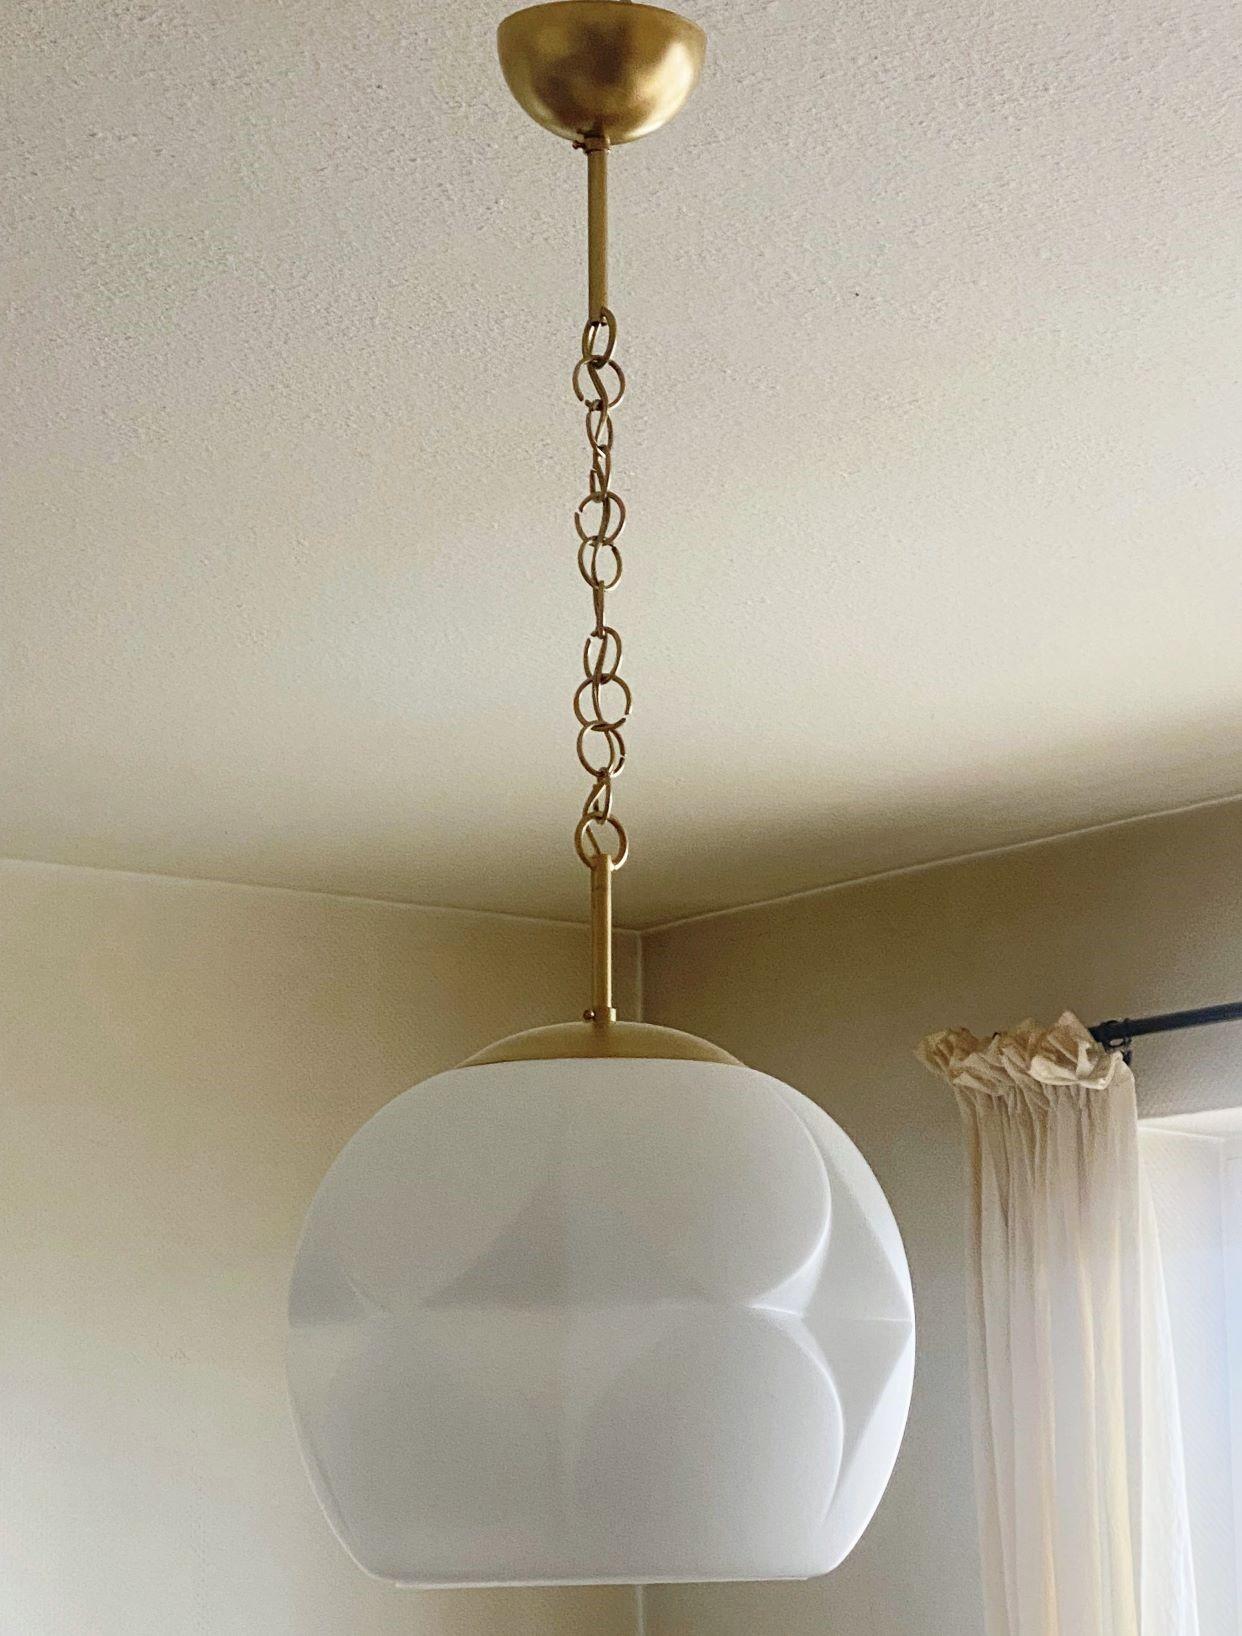 White opal glass pendant with brass mounts by Peill and Putzler, Modern Mid-Century design with organic shape, Germany, 1970s. With one porcelain light socket for a large sized Edison E27 bulb up to 100watt. This beaitiful pendant is in fine vintage